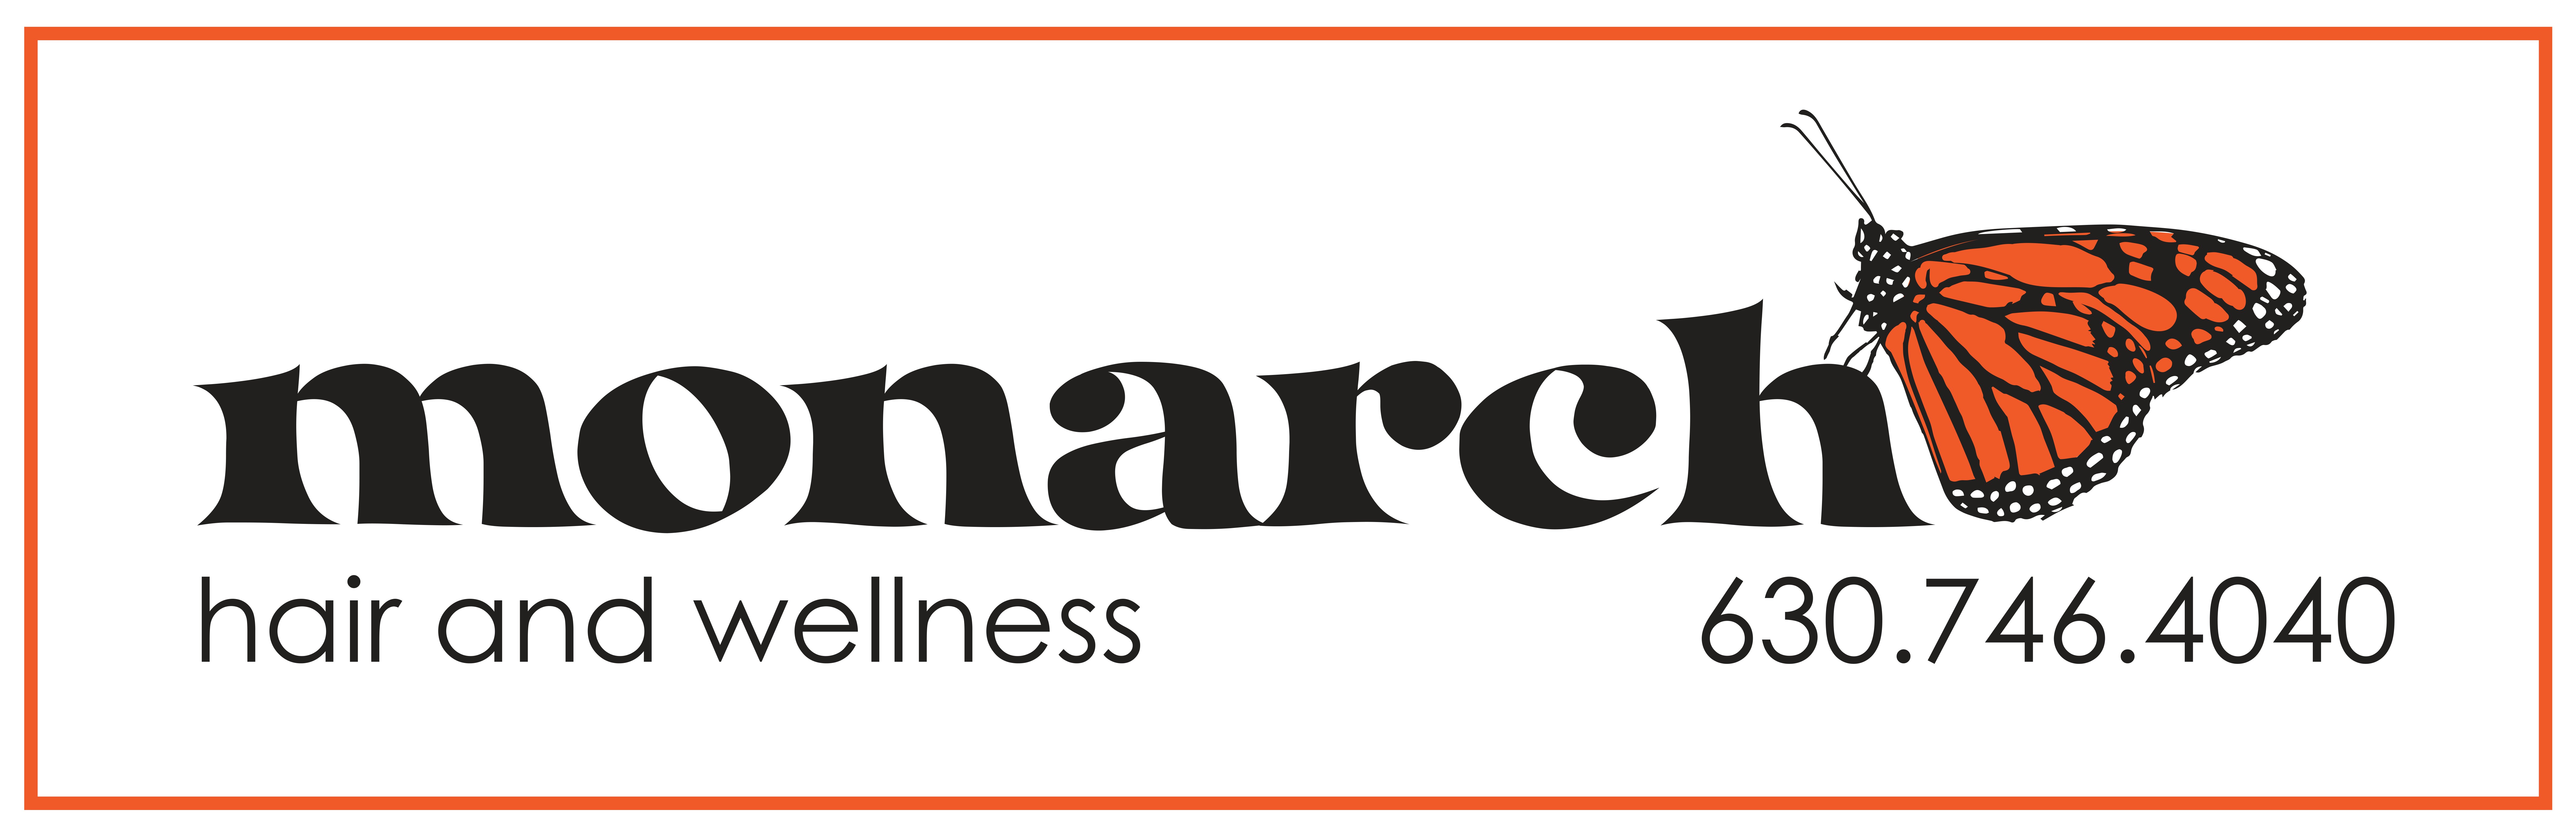 monarch hair and wellness